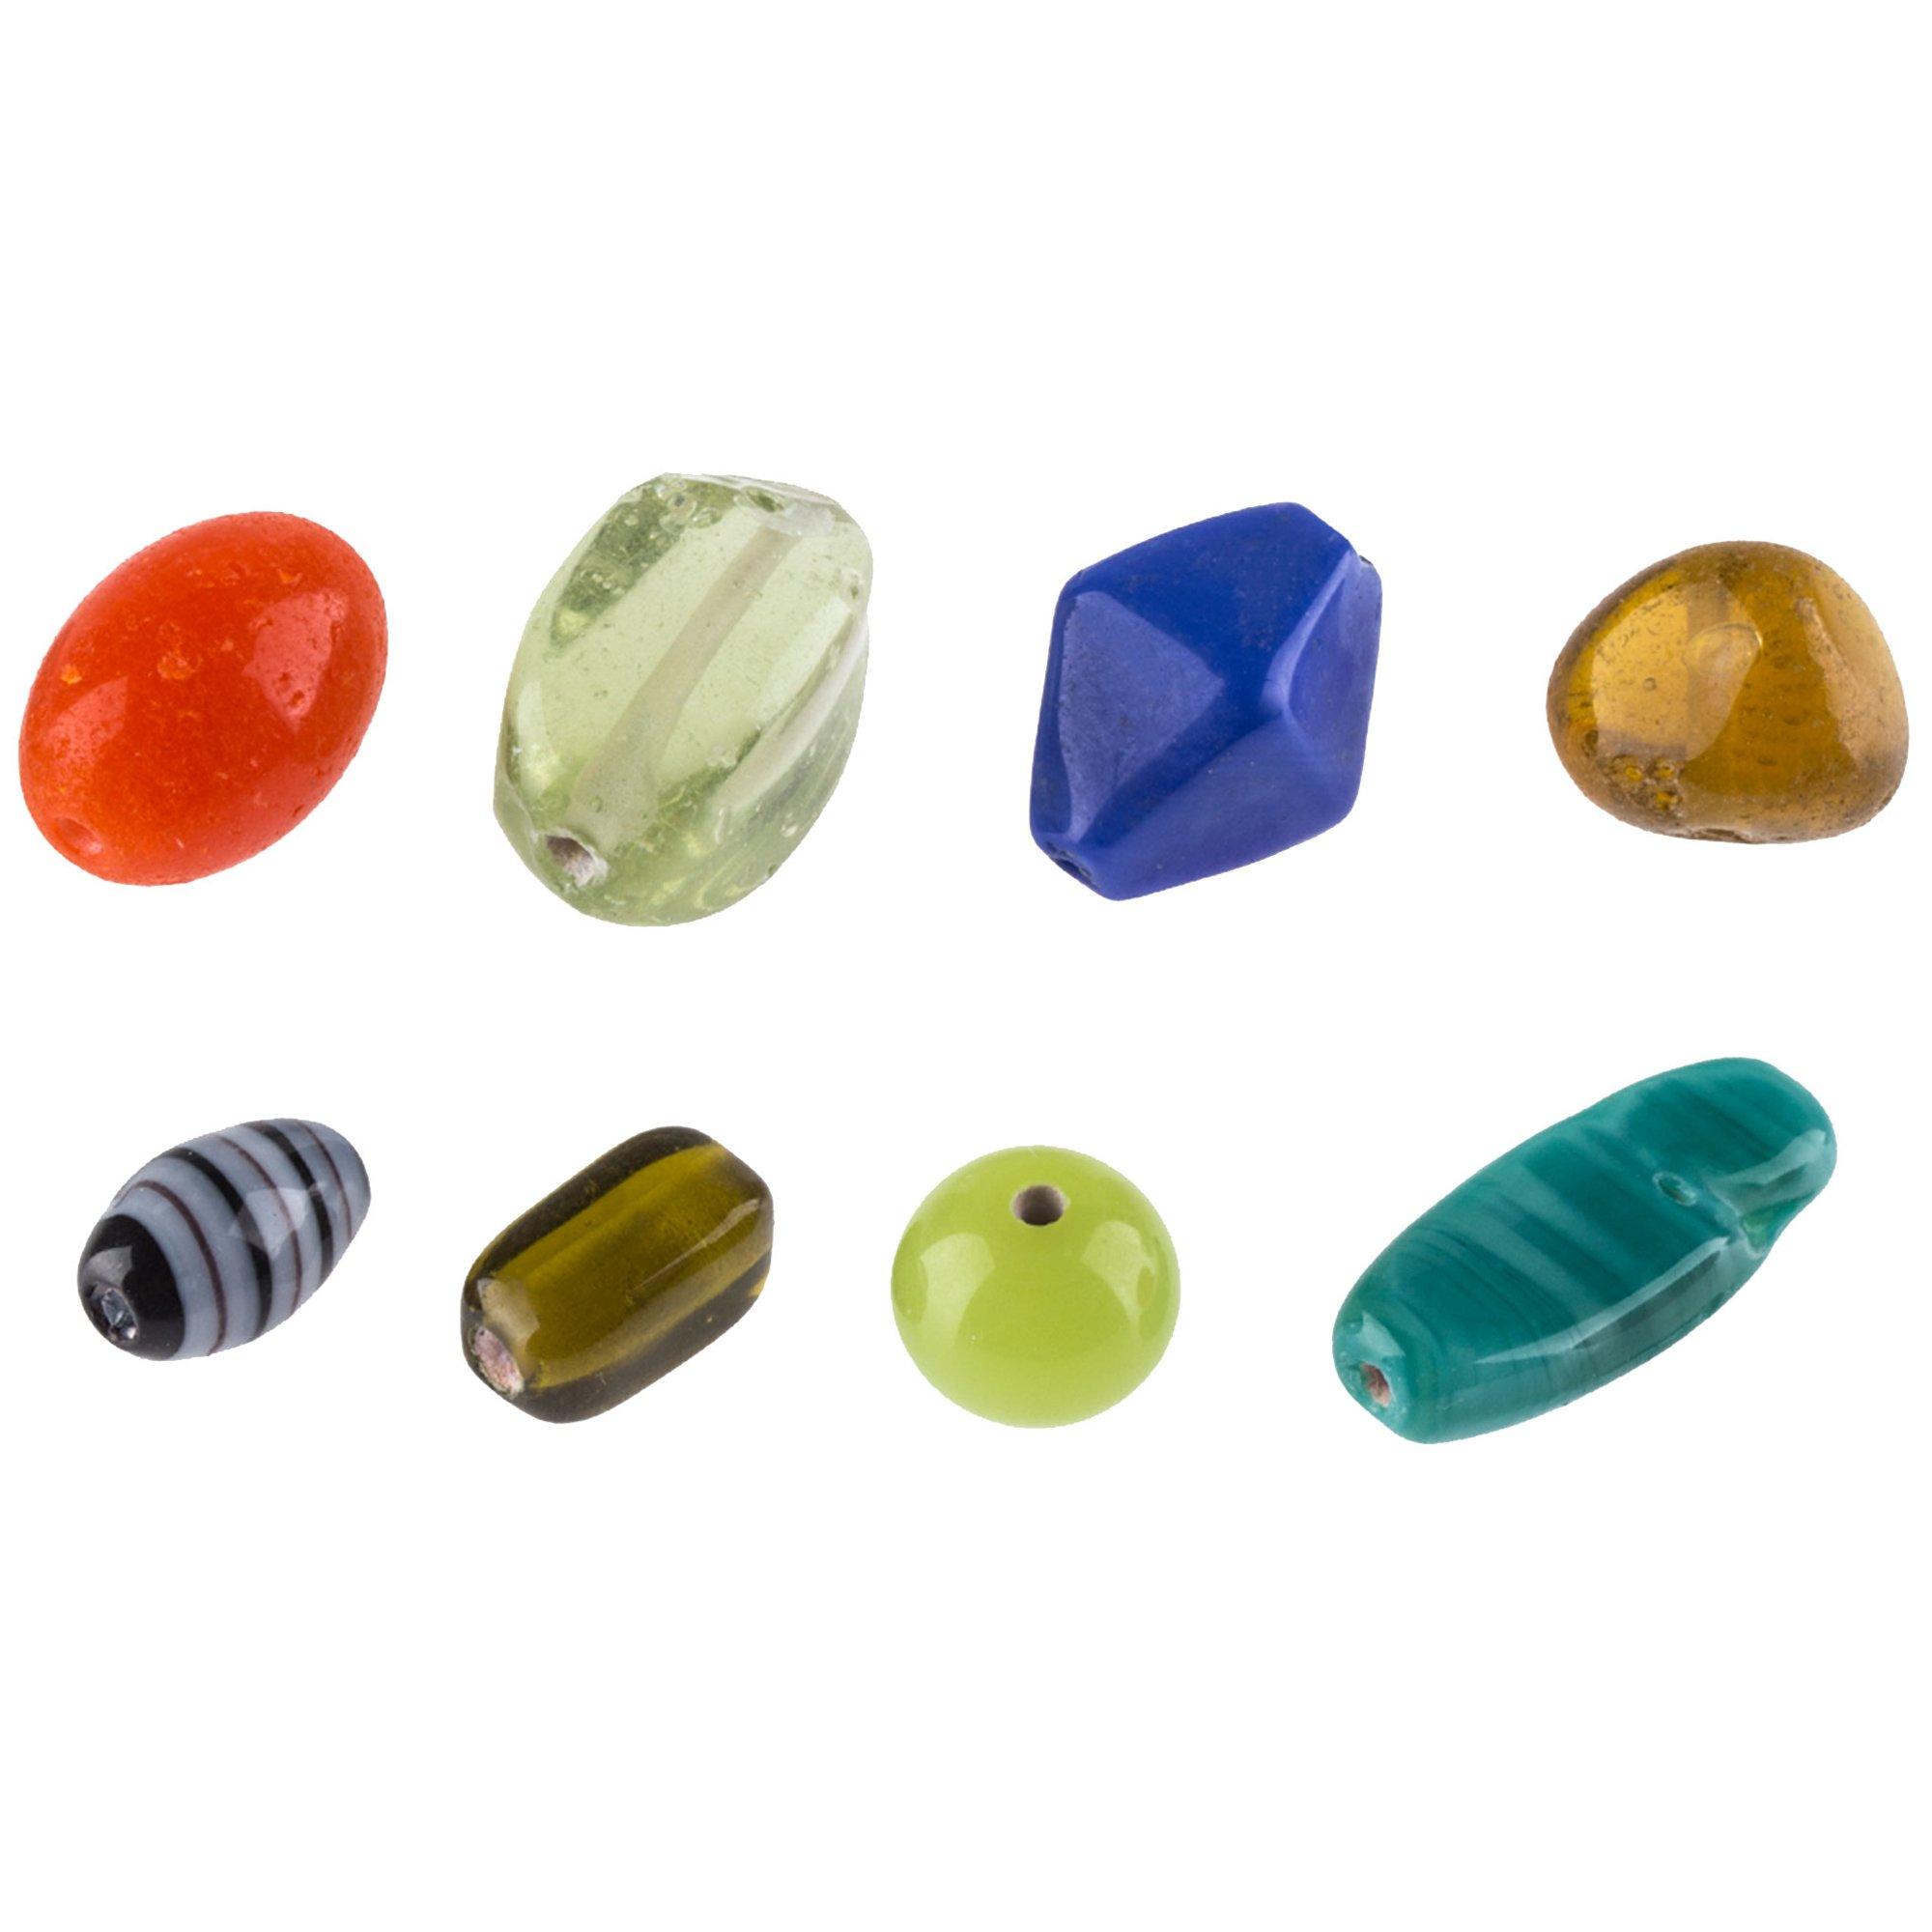 MONTHLY GRAB BAG ----- Assorted Glass Beads for Jewelry Making, DIY Work,  Arts and Crafts, Decorative Hobby Artistry, Colorful Crystal Assortment  Bulk Mix, 4-18mm